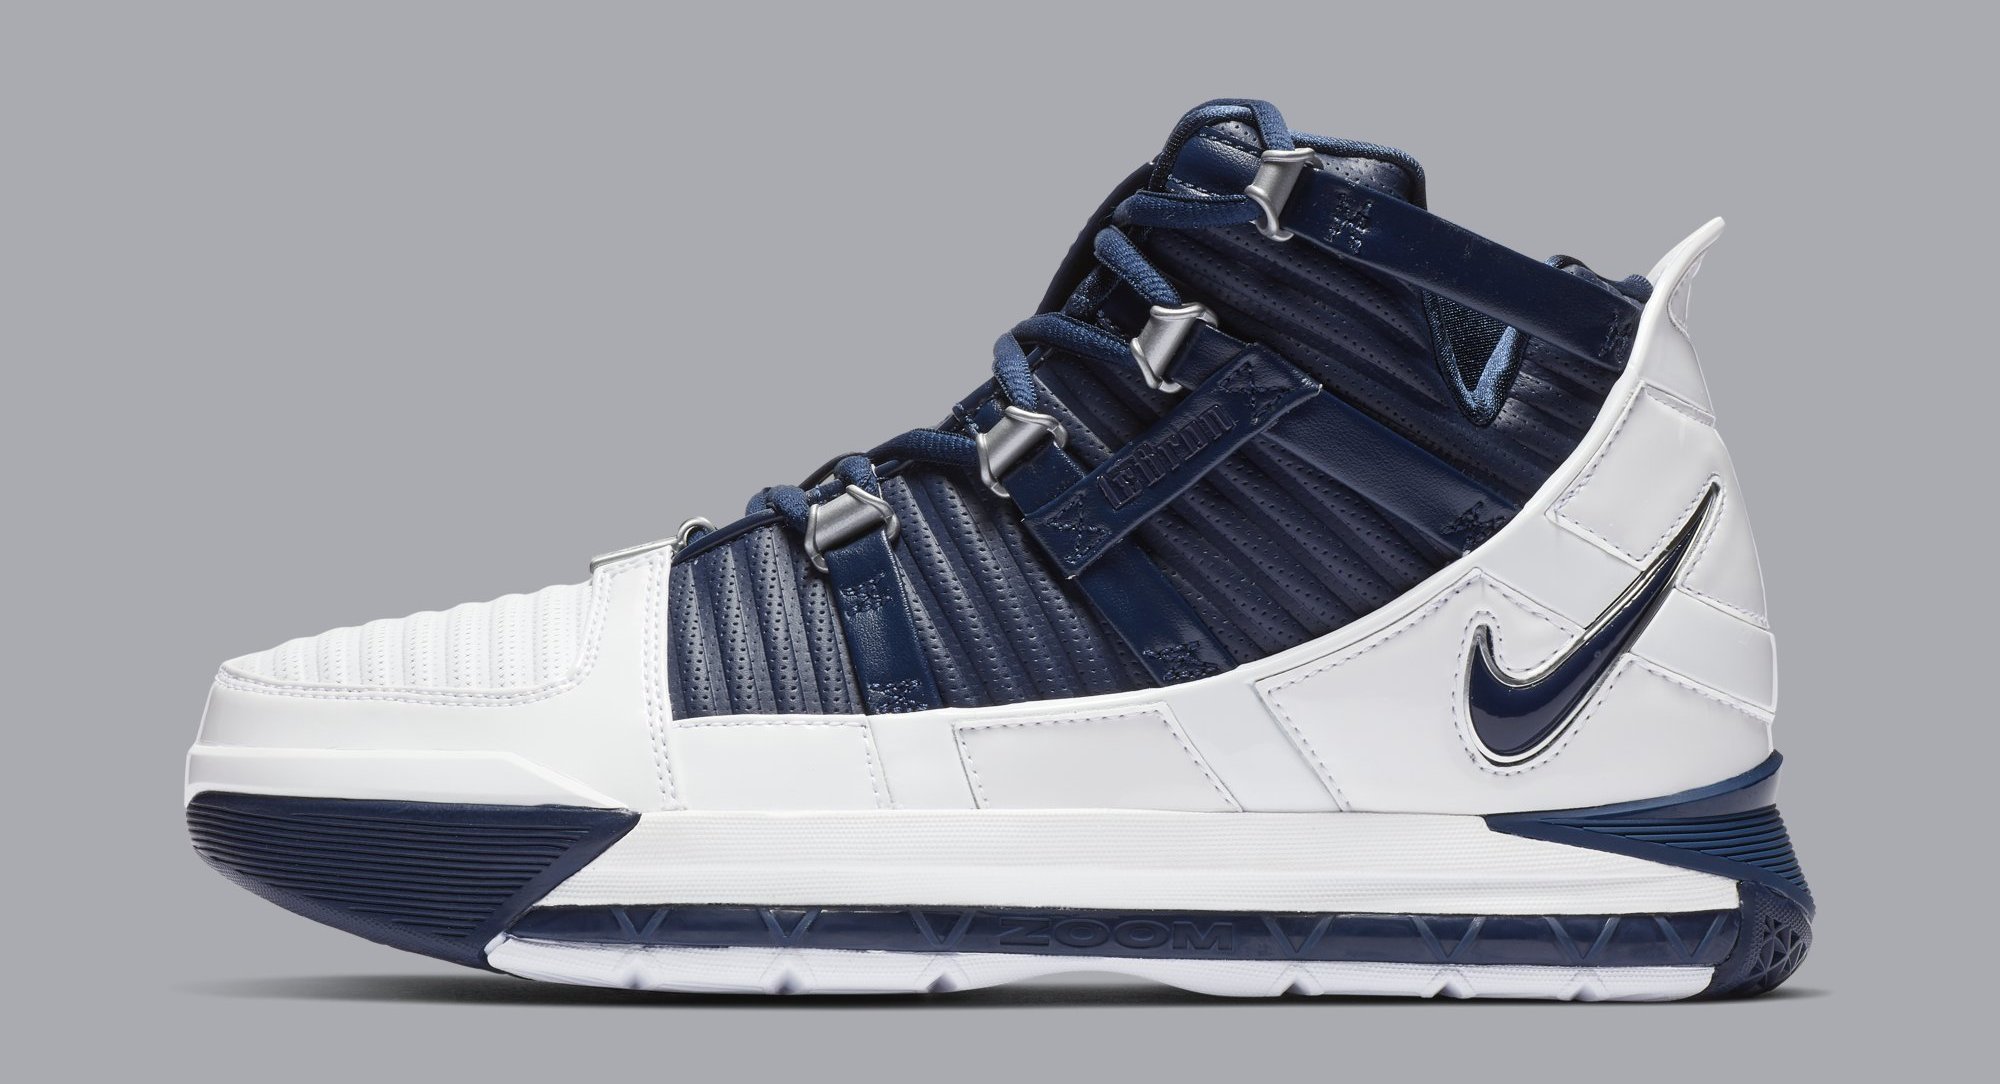 Nike Zoom LeBron 3 &#x27;White/Navy Blue/Silver&#x27; AO2434 103 (Lateral)